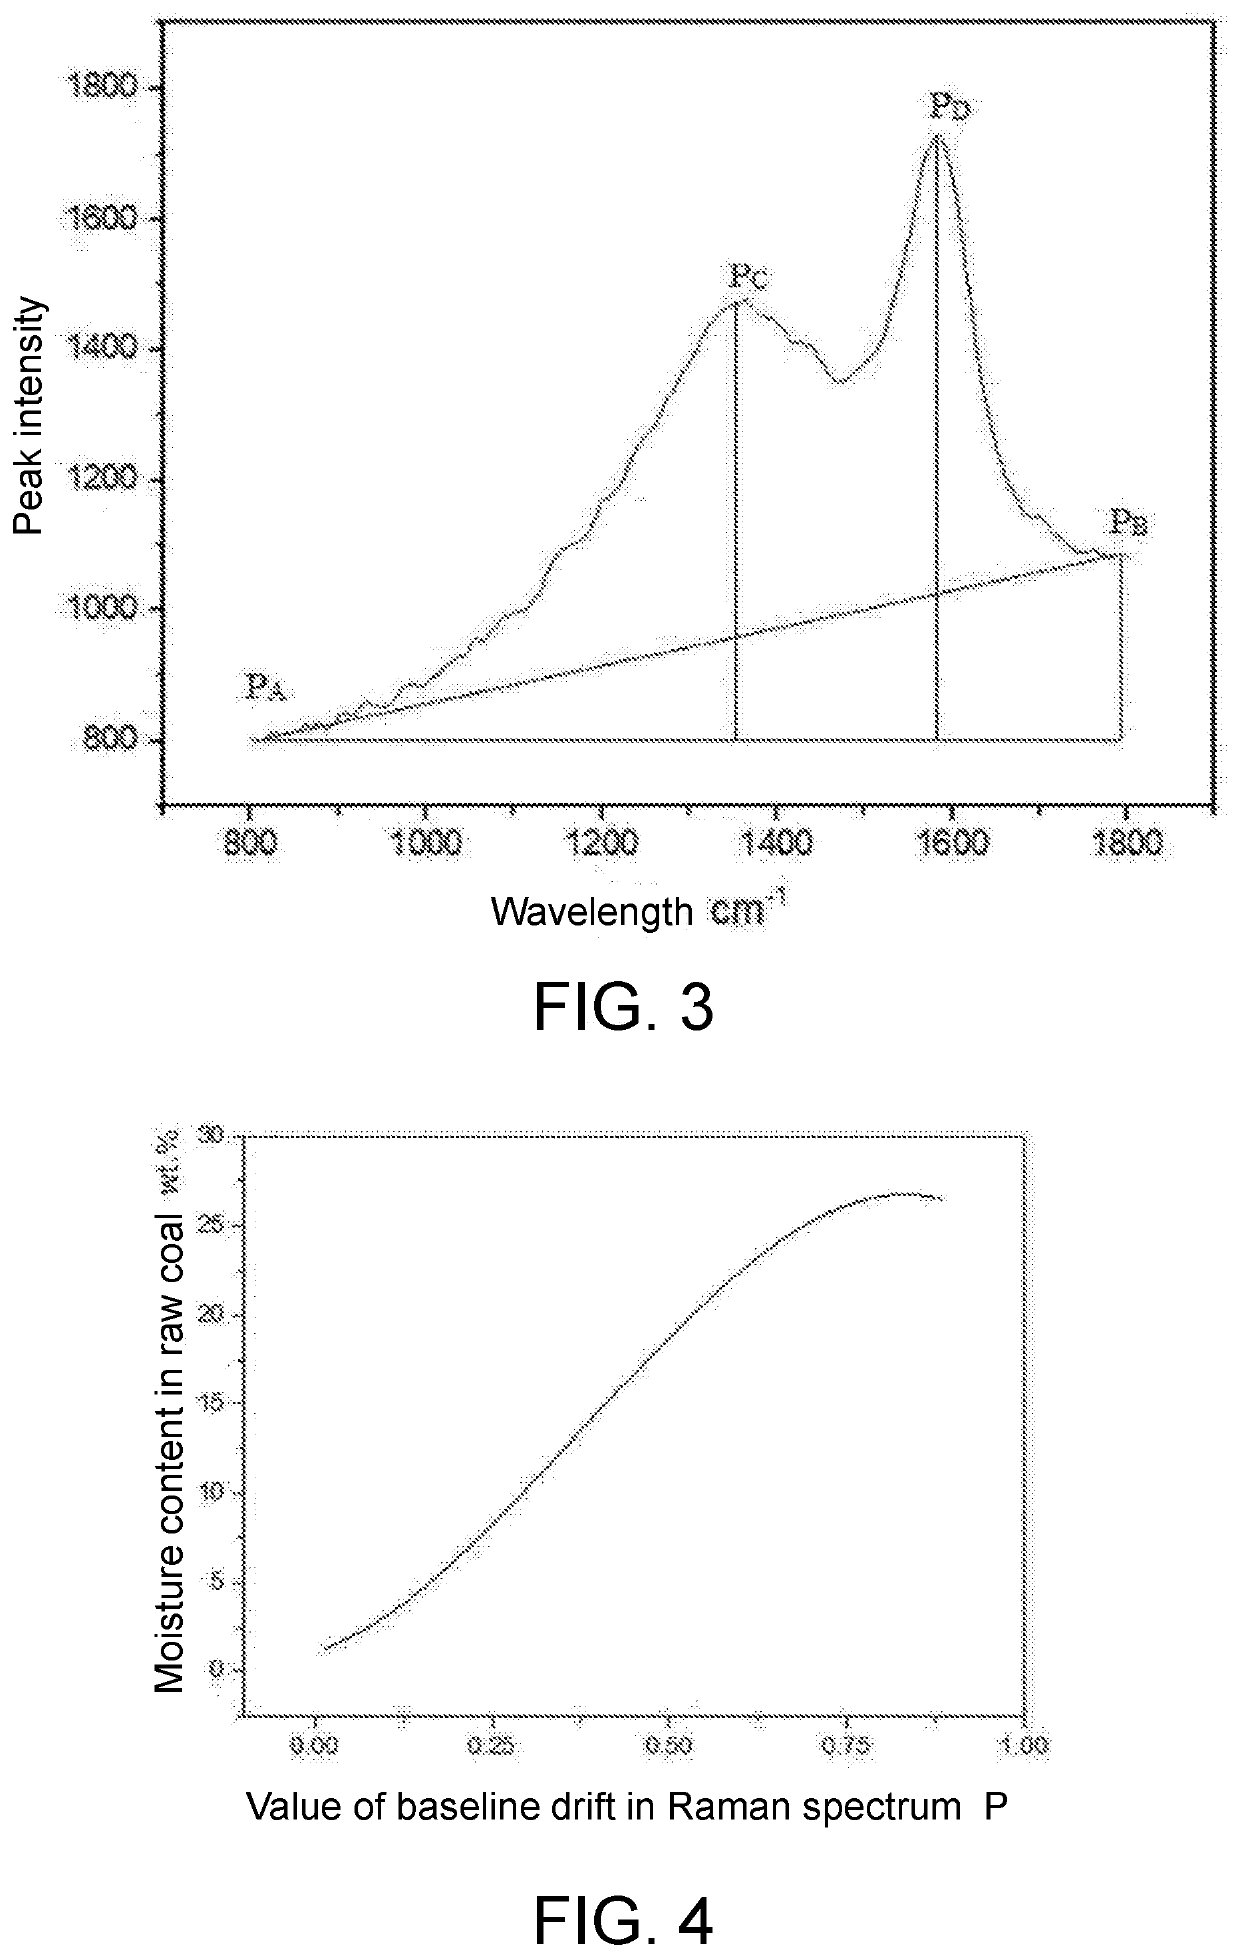 Method for detecting moisture and volatile matter content of raw coal by using value of baseline drift